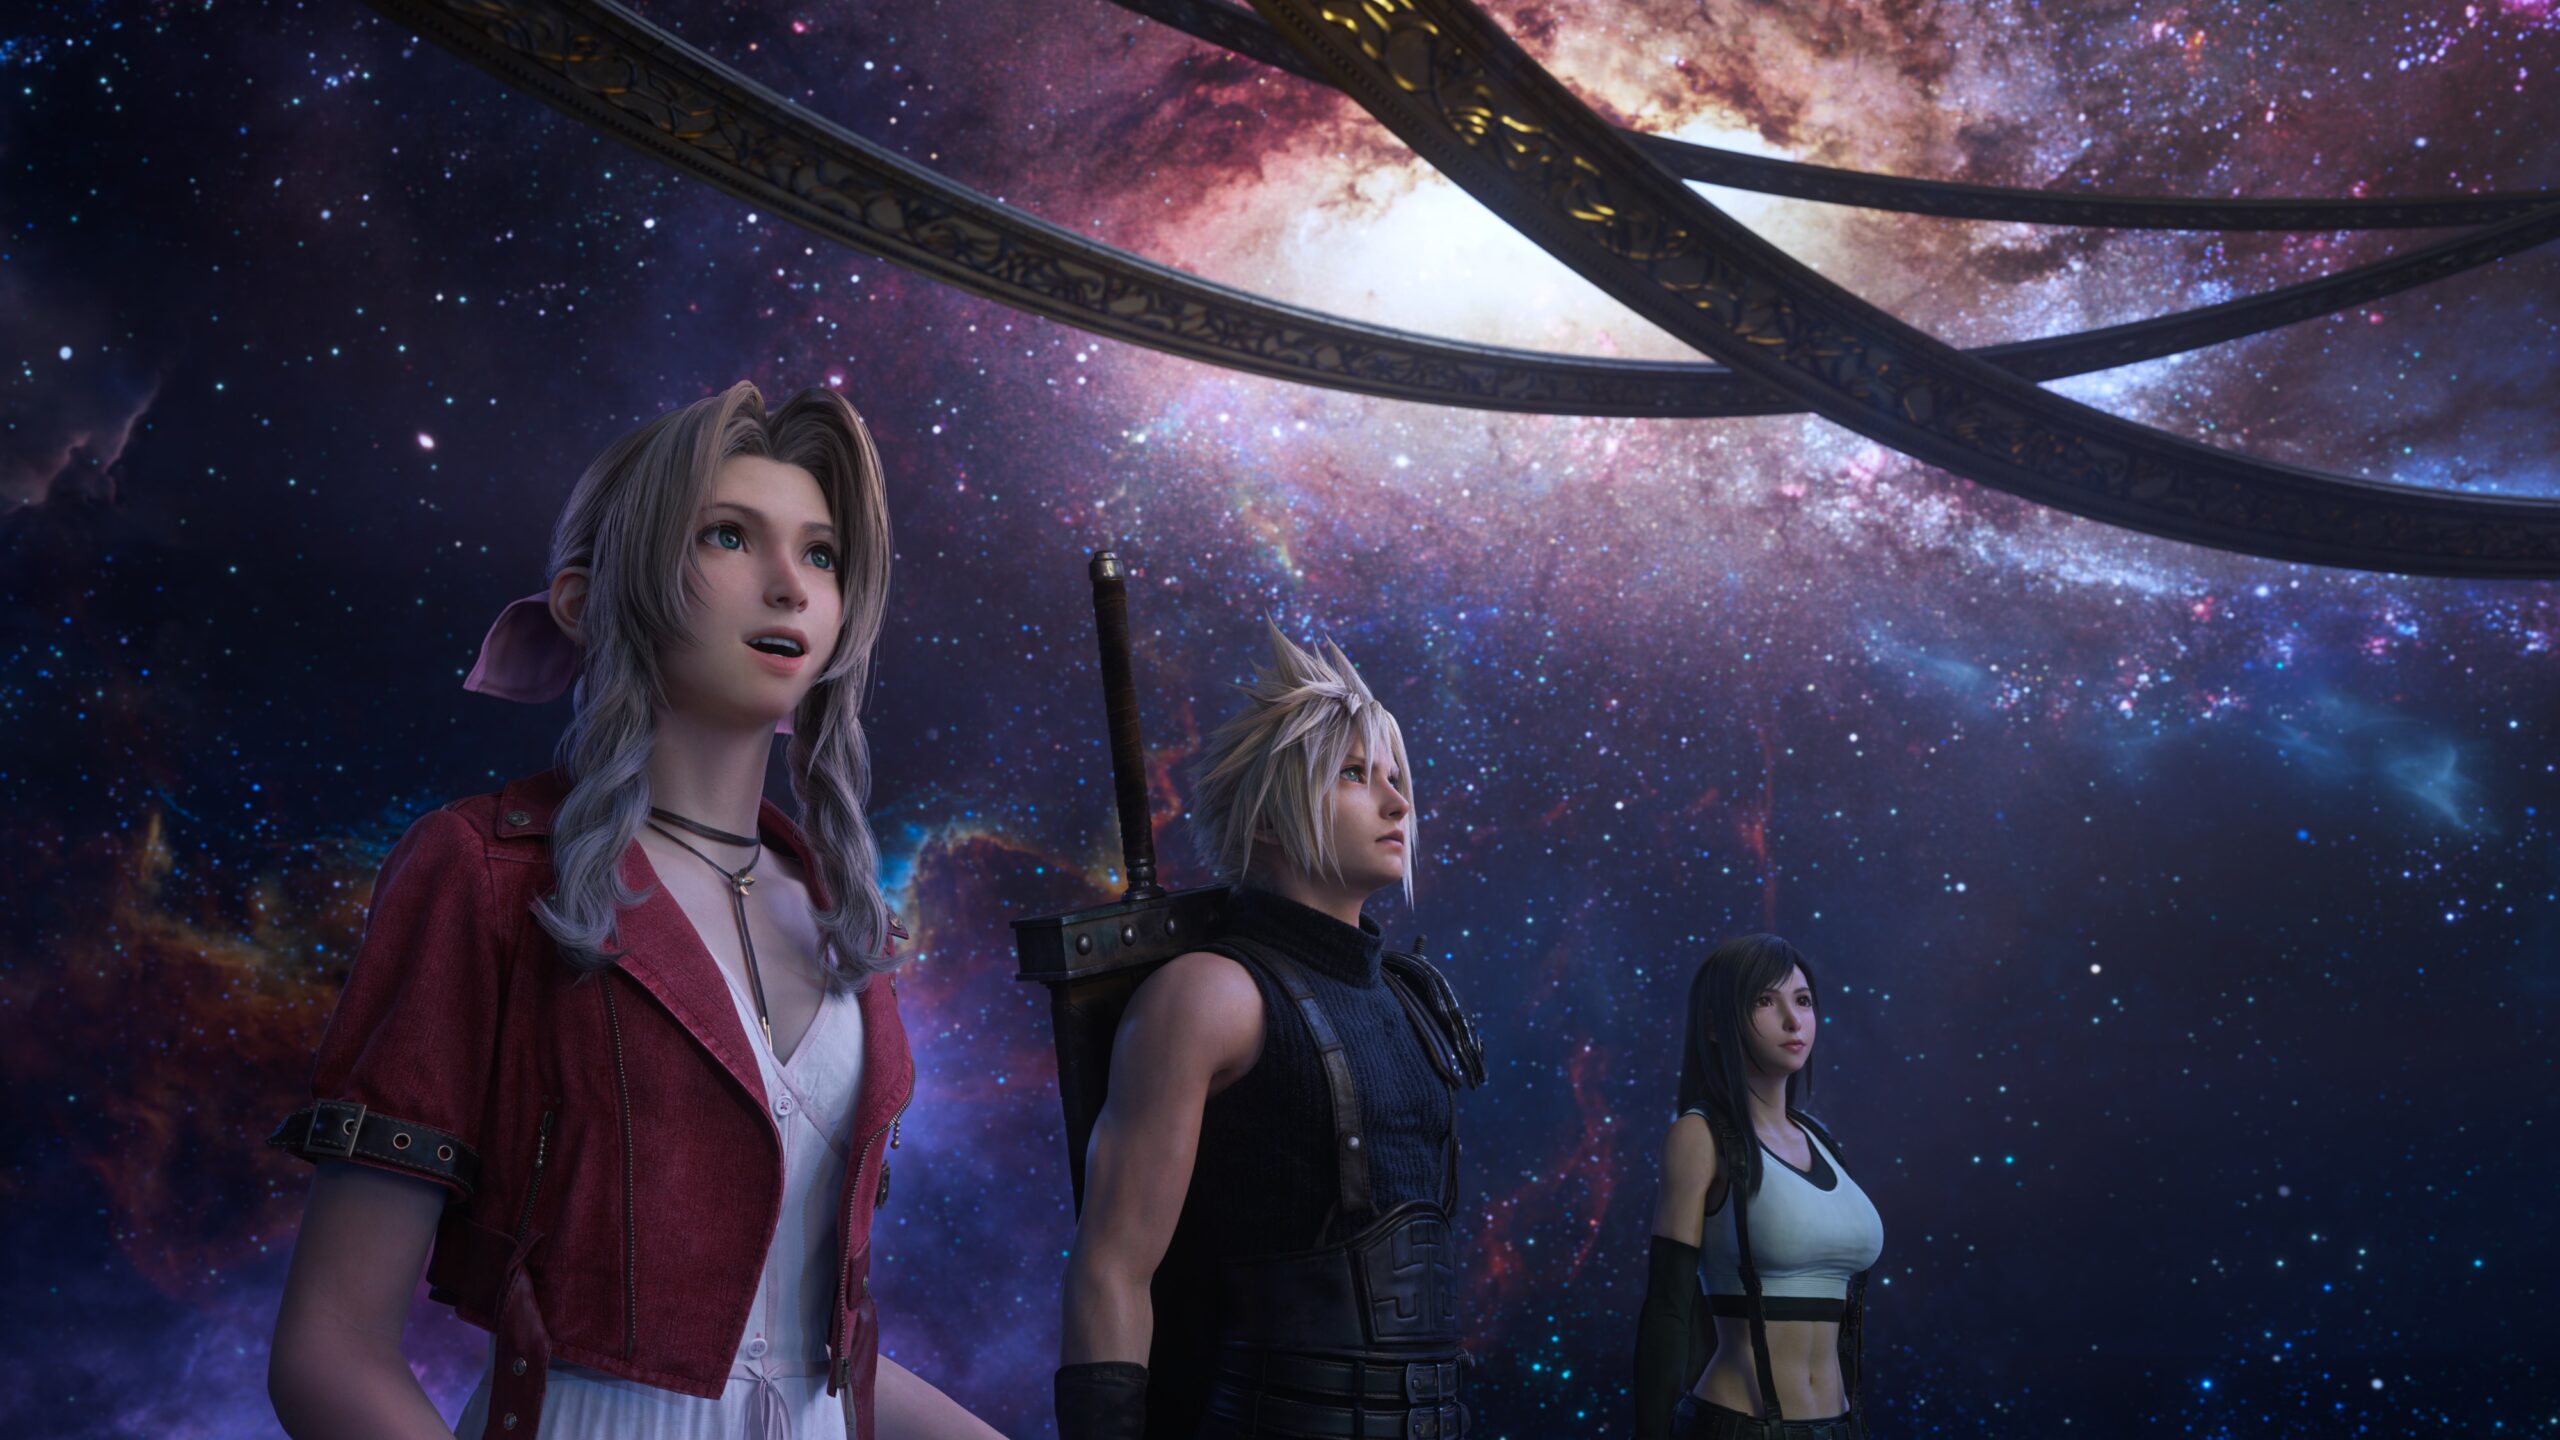 FF7 Remake Part 2 hits winter 2023, but not on PC